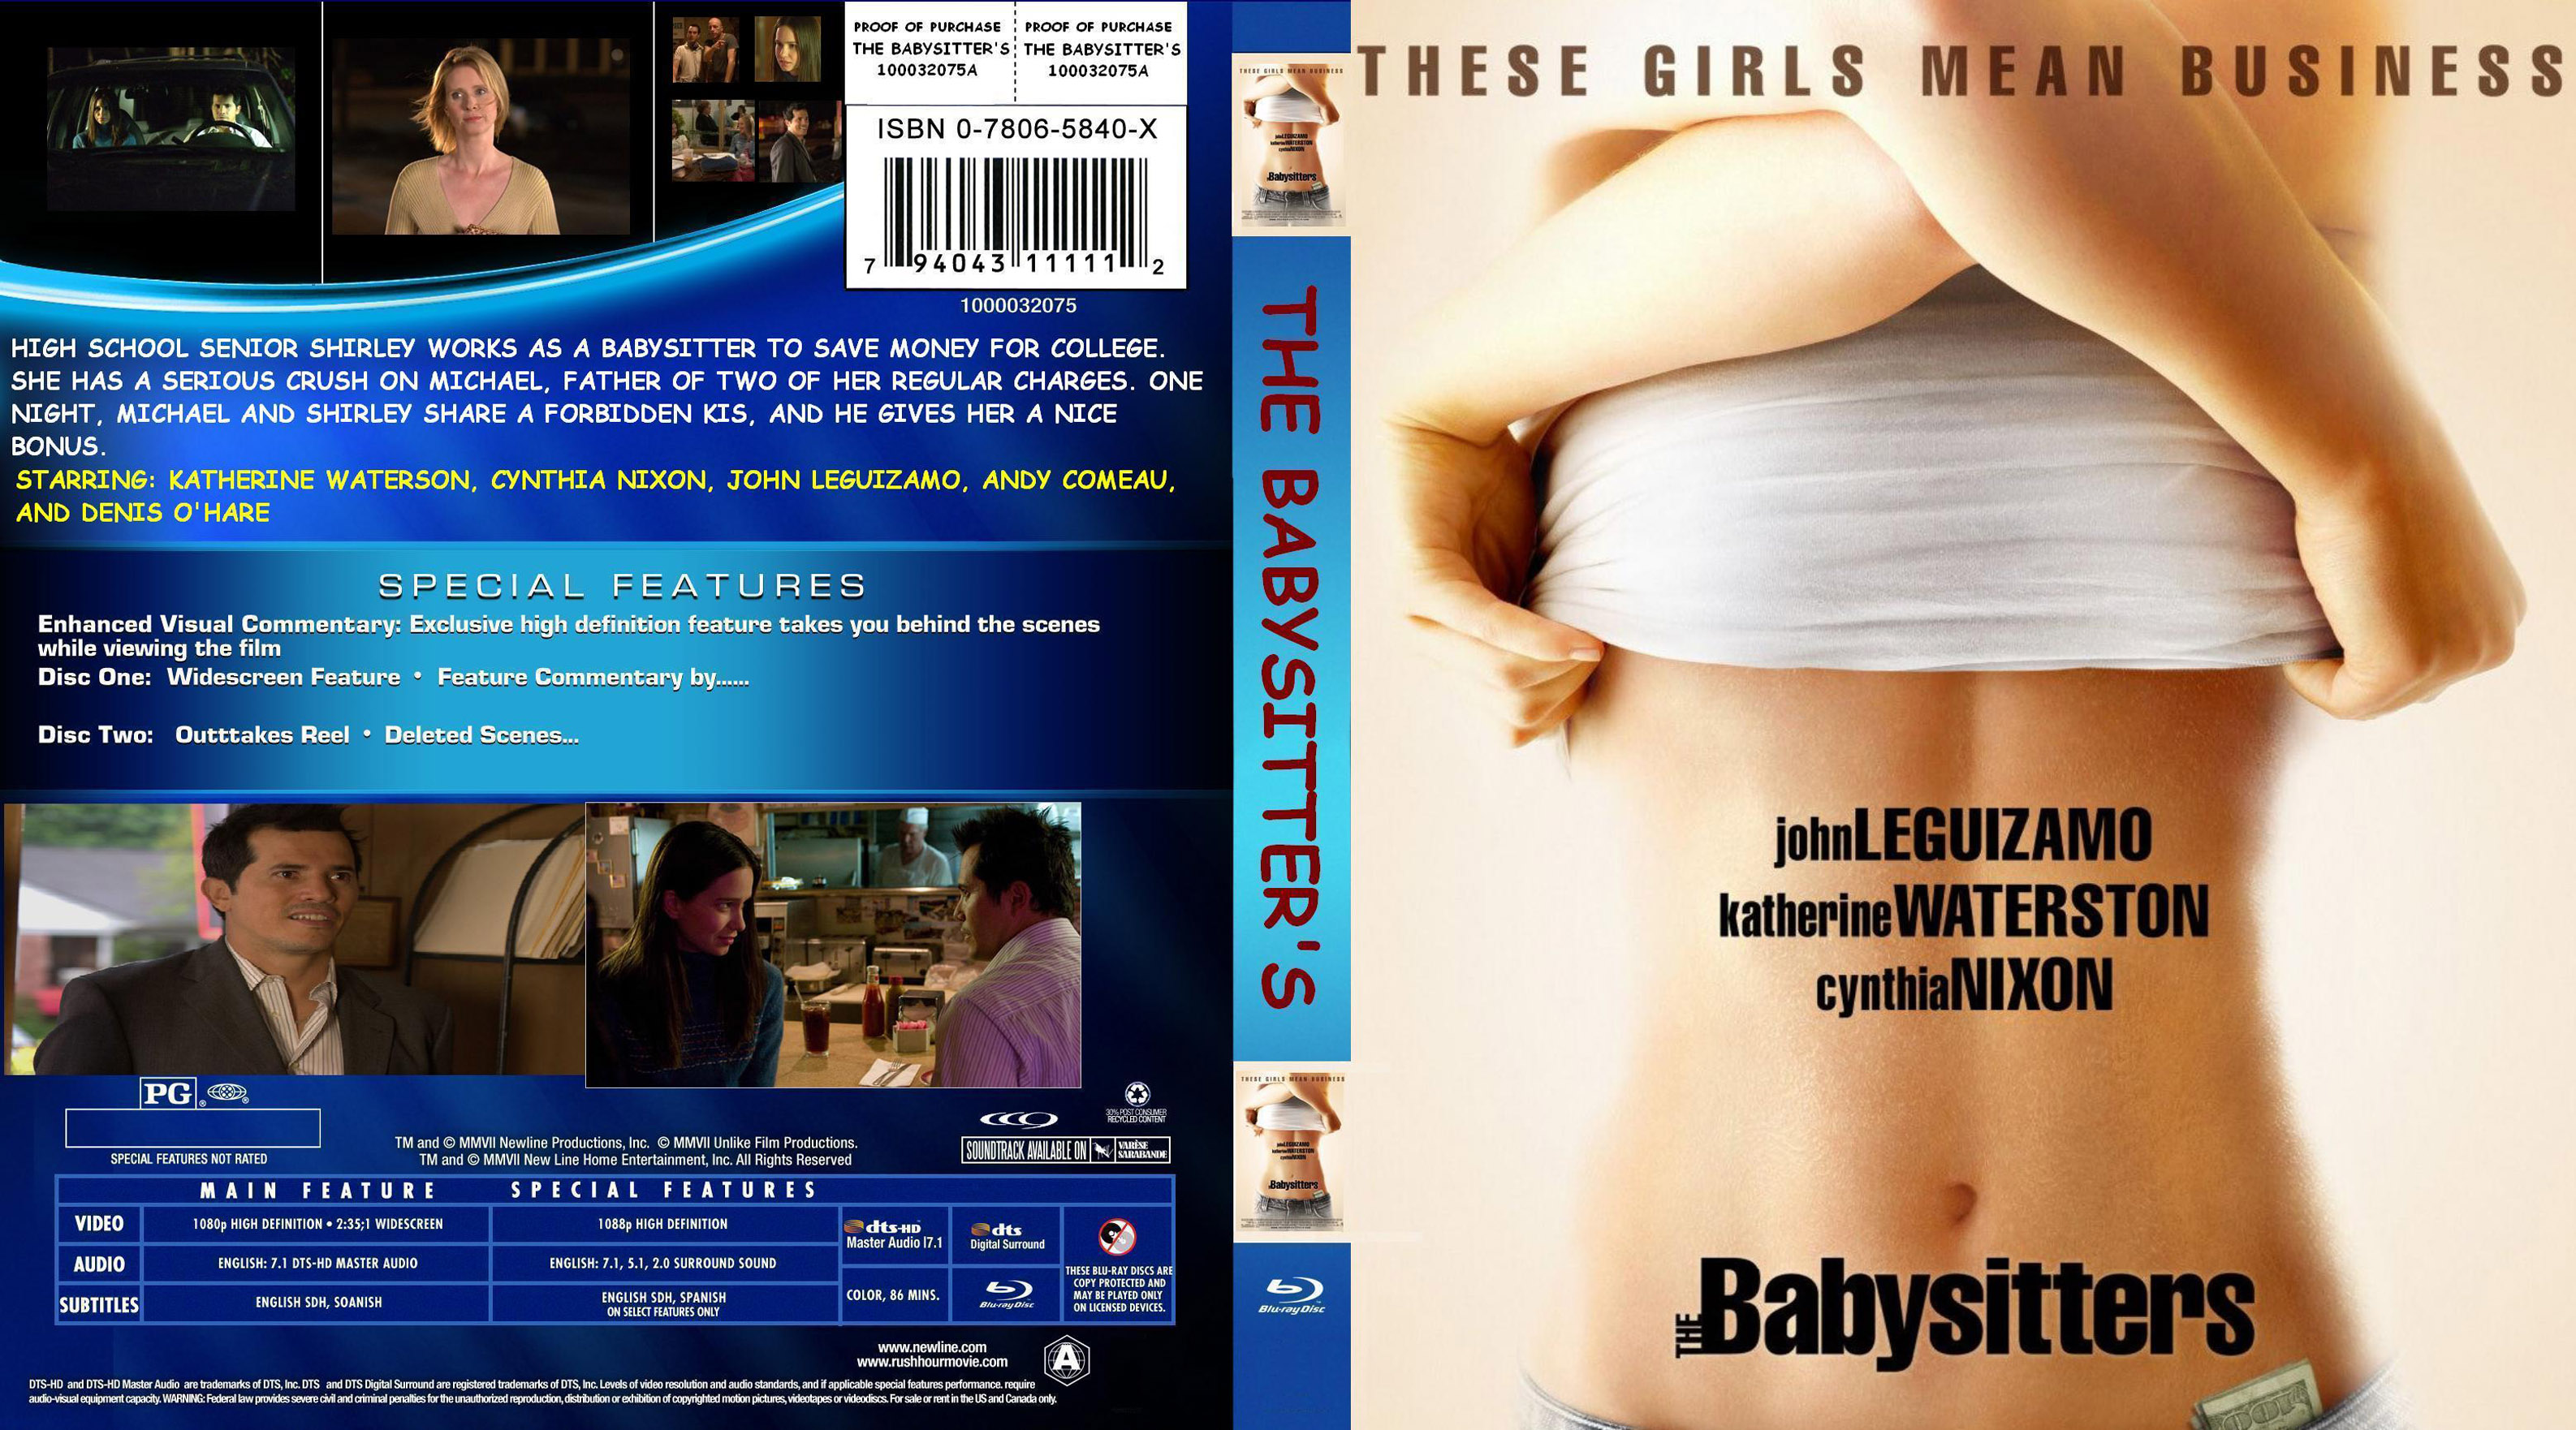 Download The Babysitters 2007 Full Hd Quality